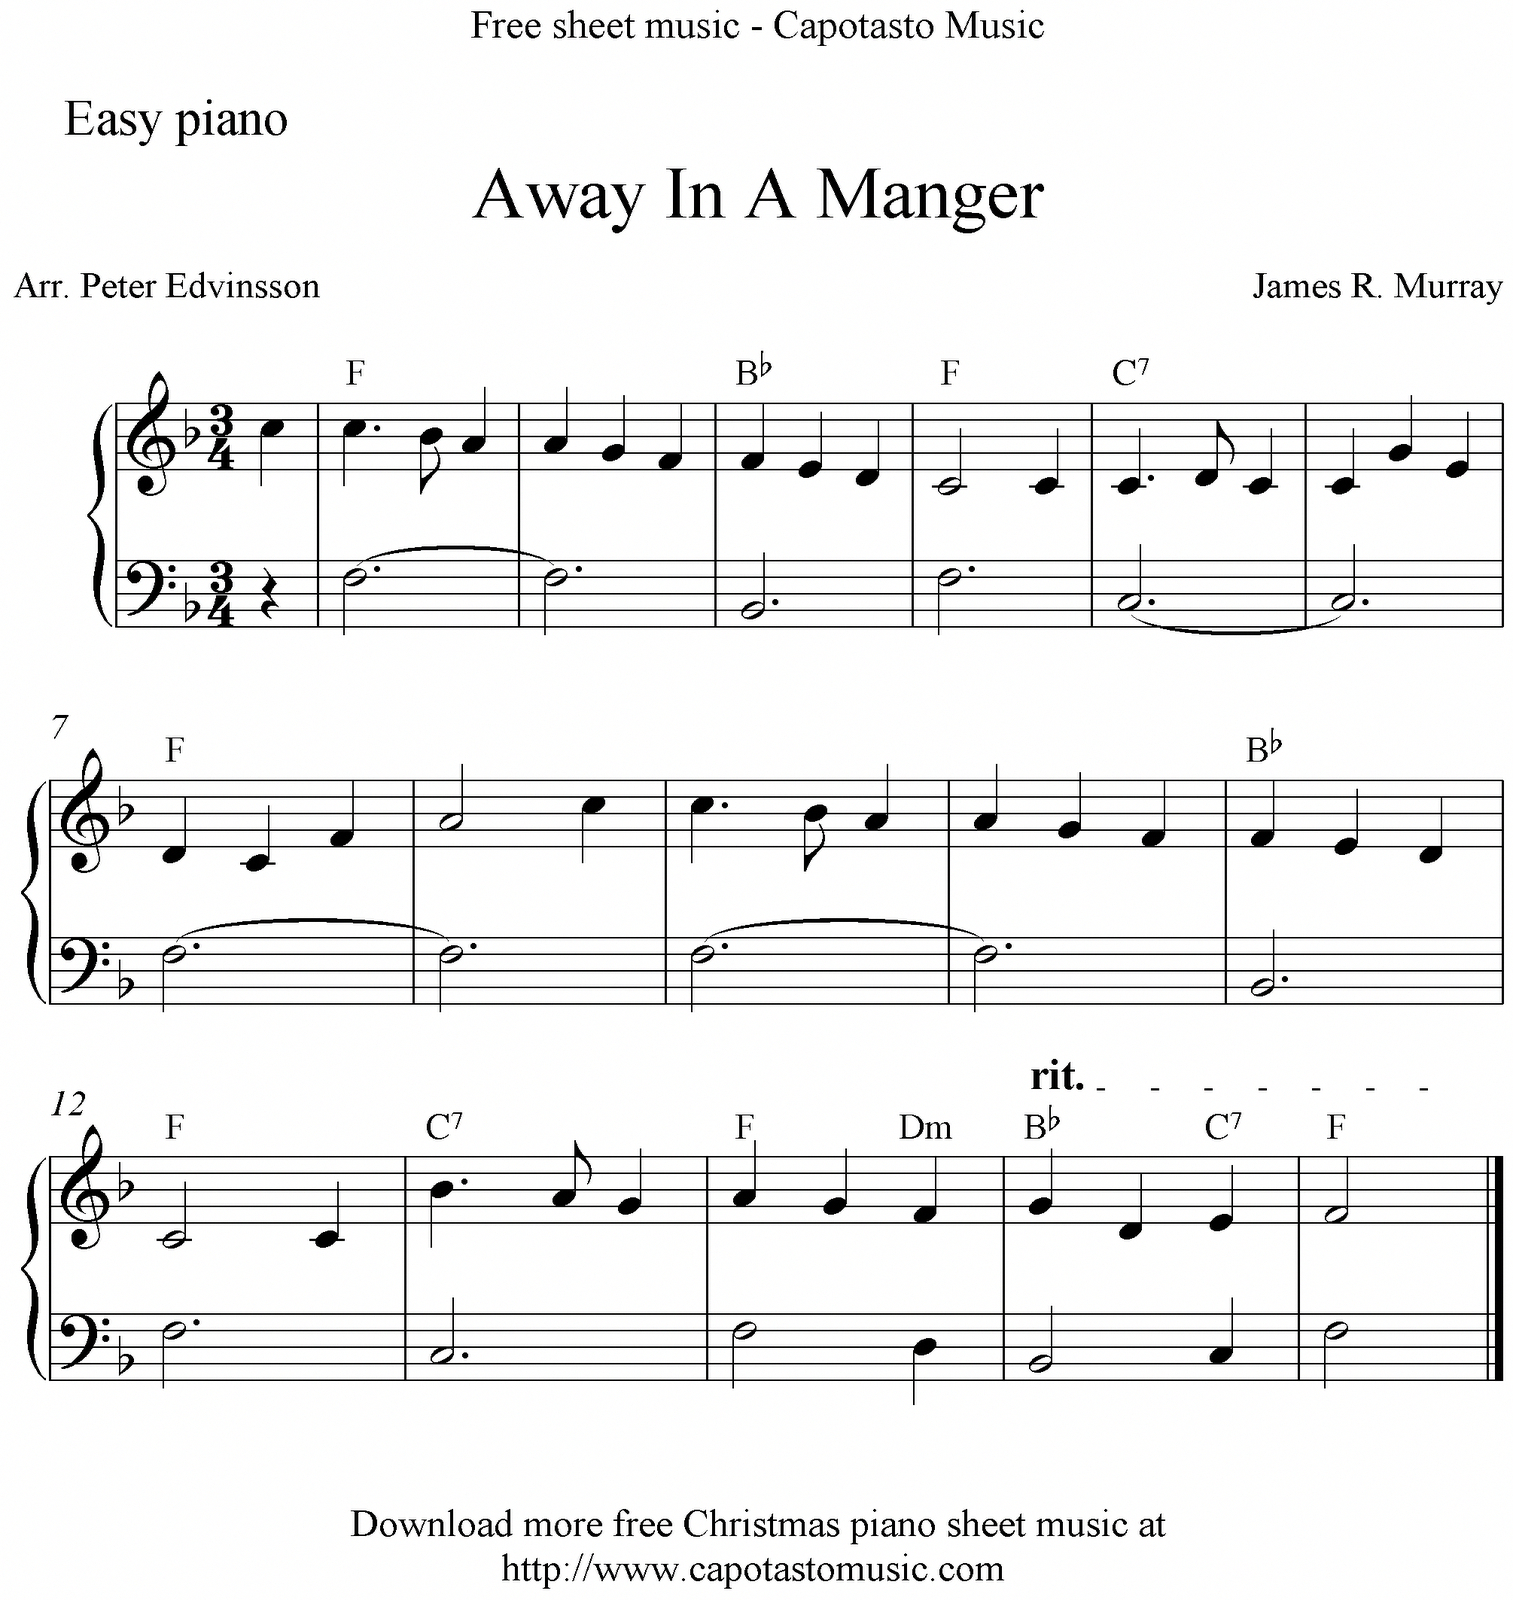 Easy Piano Arrangementpeter Edvinsson Of The Christmas Carol - Free Printable Sheet Music For Piano